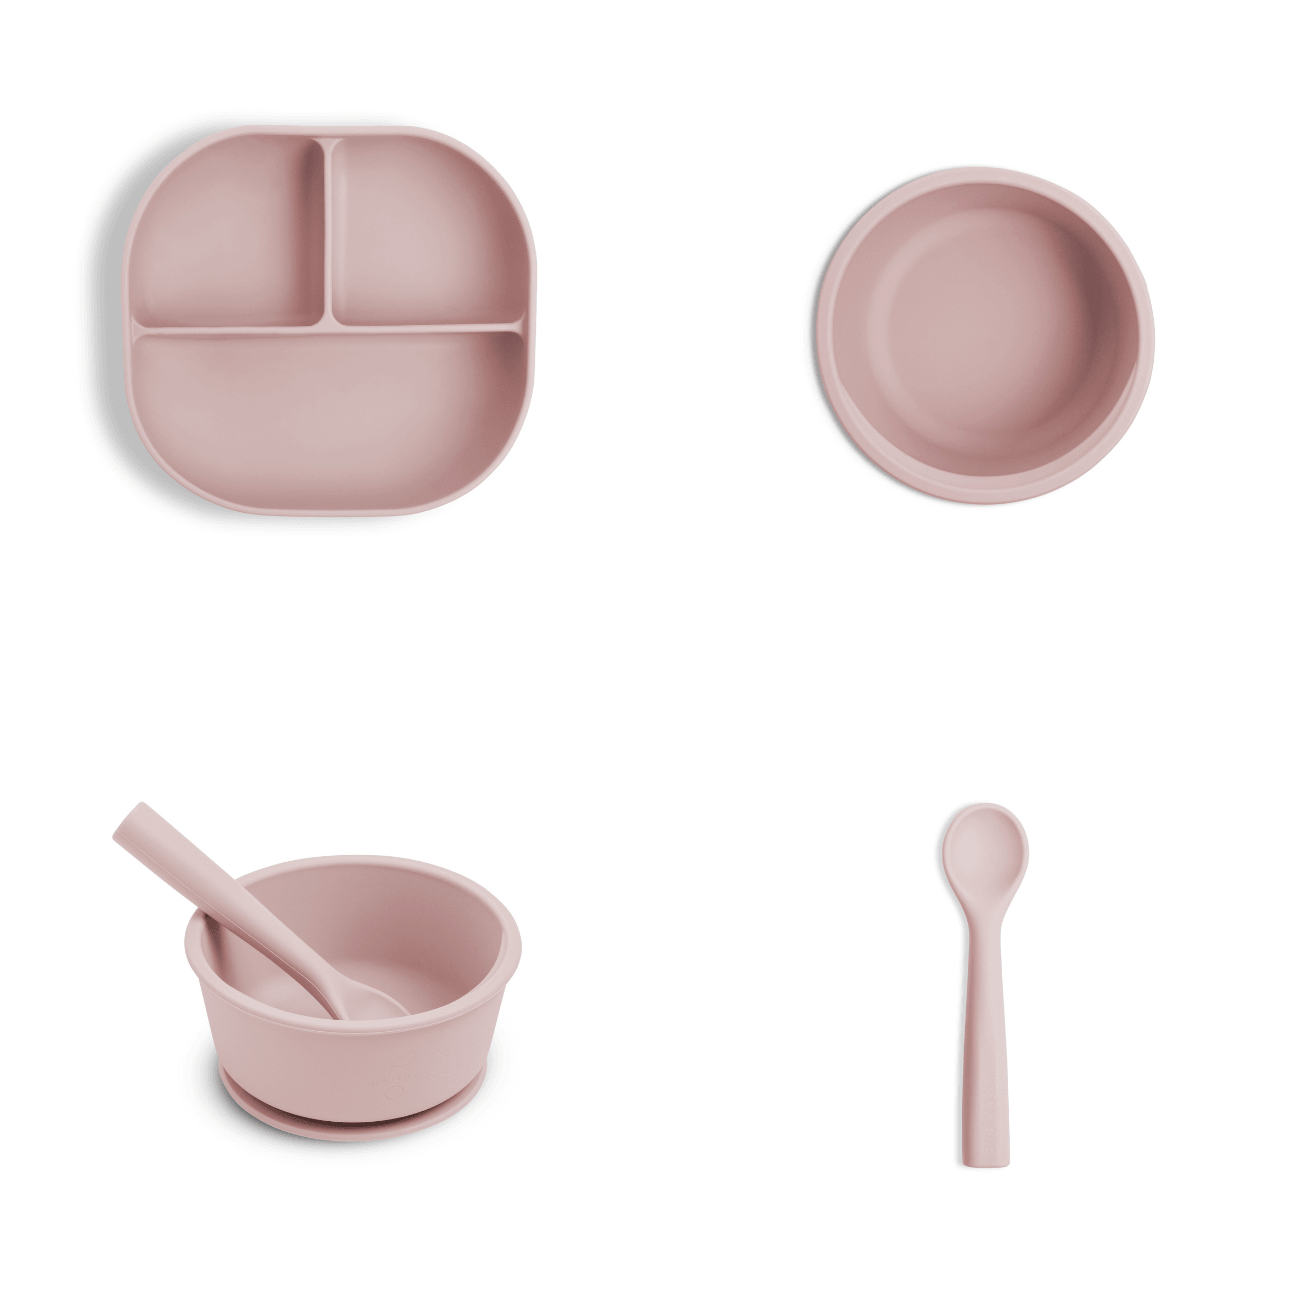 Maison Rue Baby Mealtime Willa 3 piece Set in Rose Color 